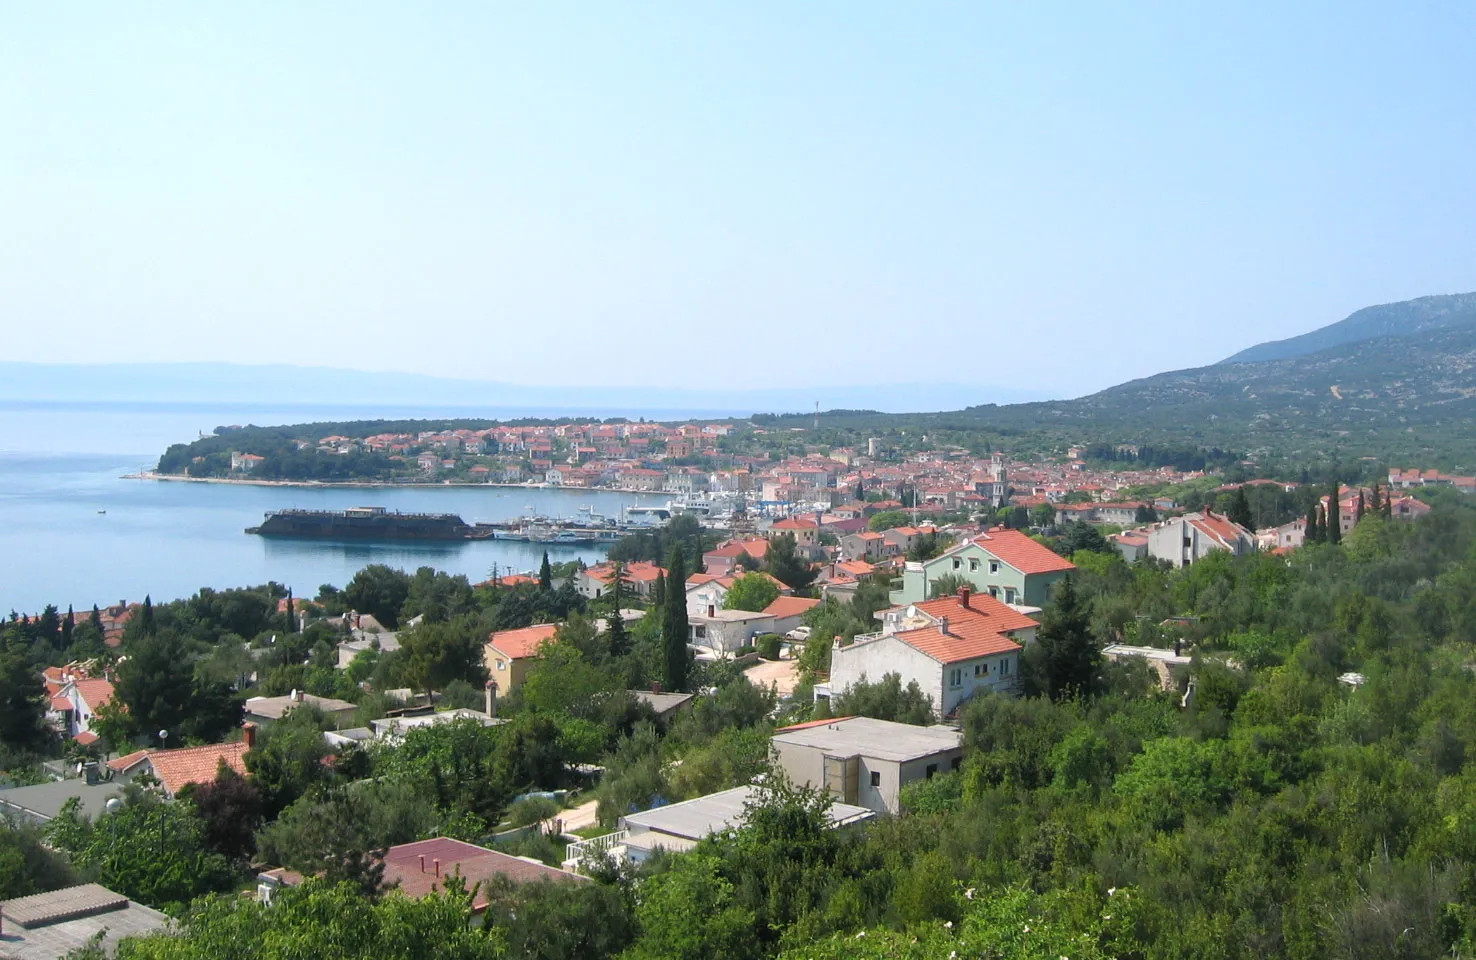 Photo showing: City of Cres, capital of the island Cres, Croatia